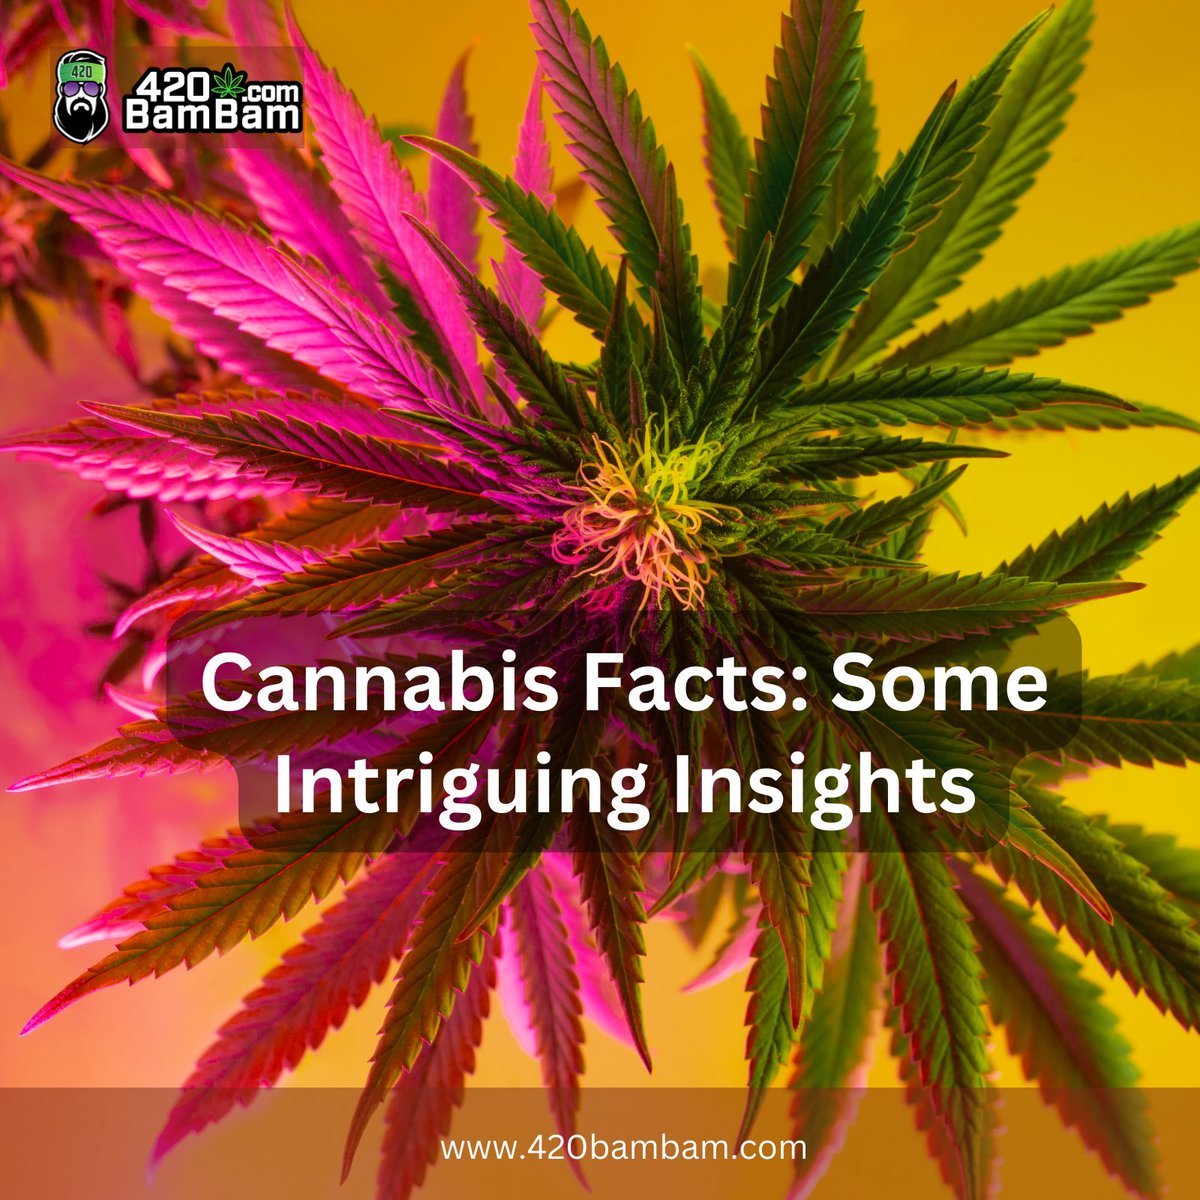 -Cannabis: ancient plant, modern marvel. Used for centuries for medicine, industry, and fun.
-Over 100 cannabinoids in cannabis, but THC and CBD steal the spotlight.
-Medical cannabis: a lifeline for chronic pain, epilepsy, MS, and chemo side effects.
#CannaCommunity #420BamBam